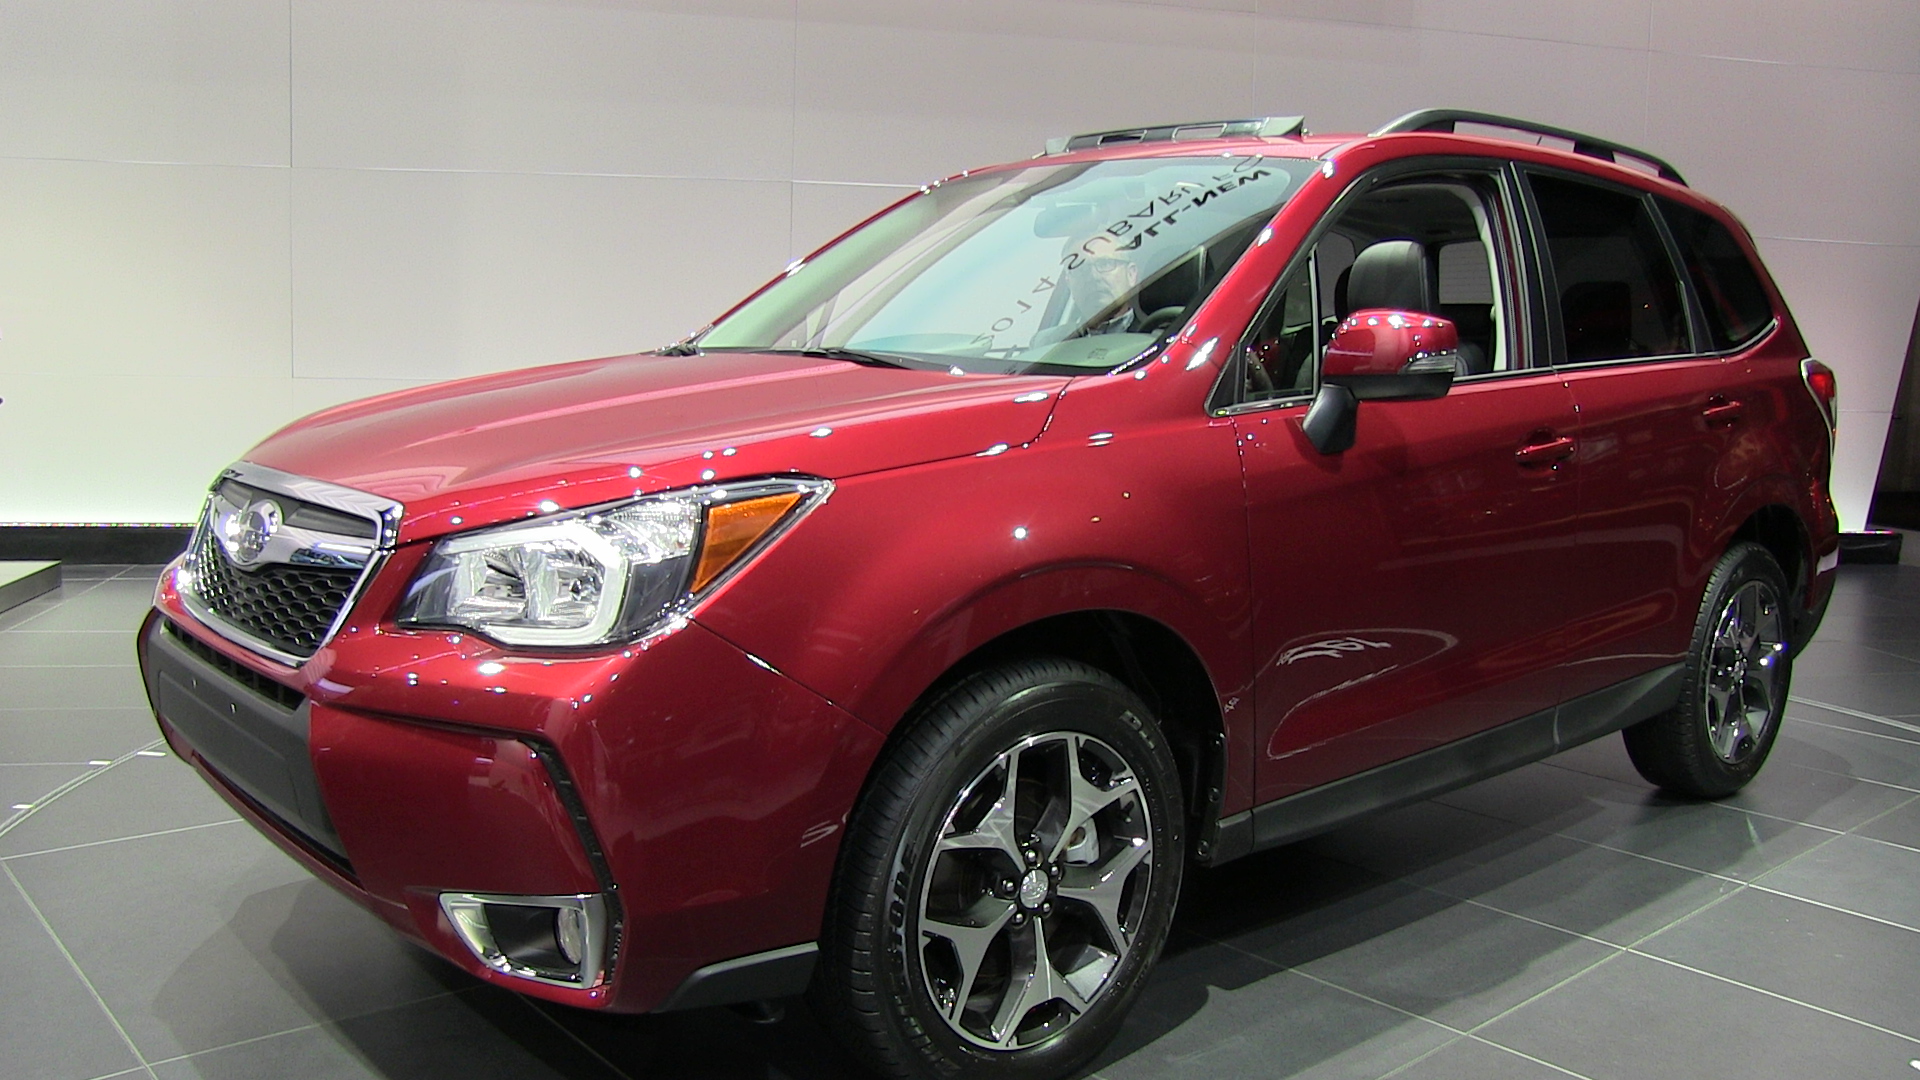 Watch the 2014 Subaru Forester XT Turbo debut at the 2012